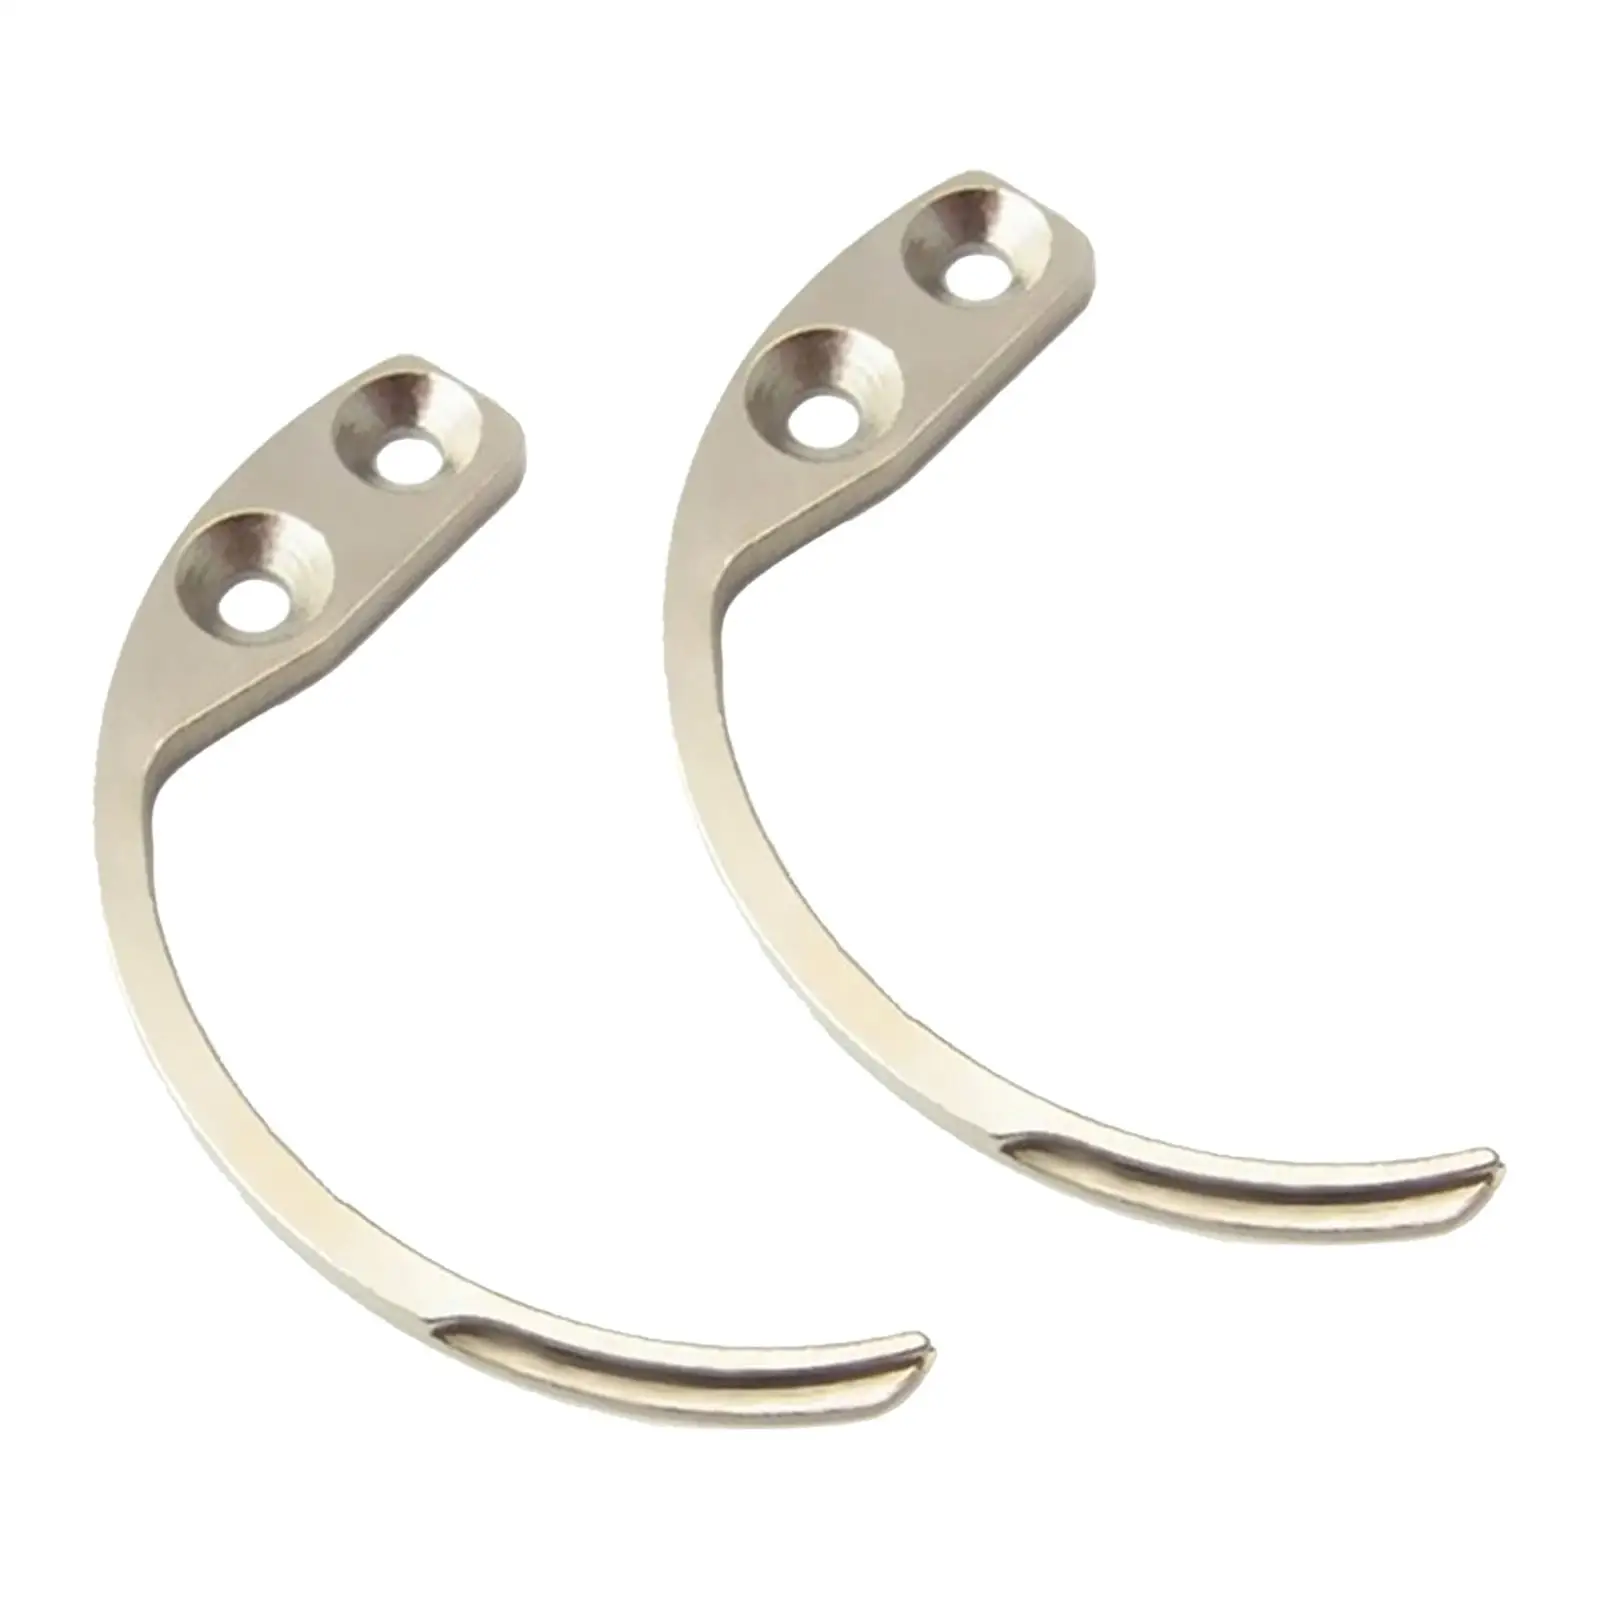 2 Piece Detacher Hooks Eas pin Manual Anti-Theft Buckle Hook for Slipper Shoes retail shop tag Supermarket Security Tags